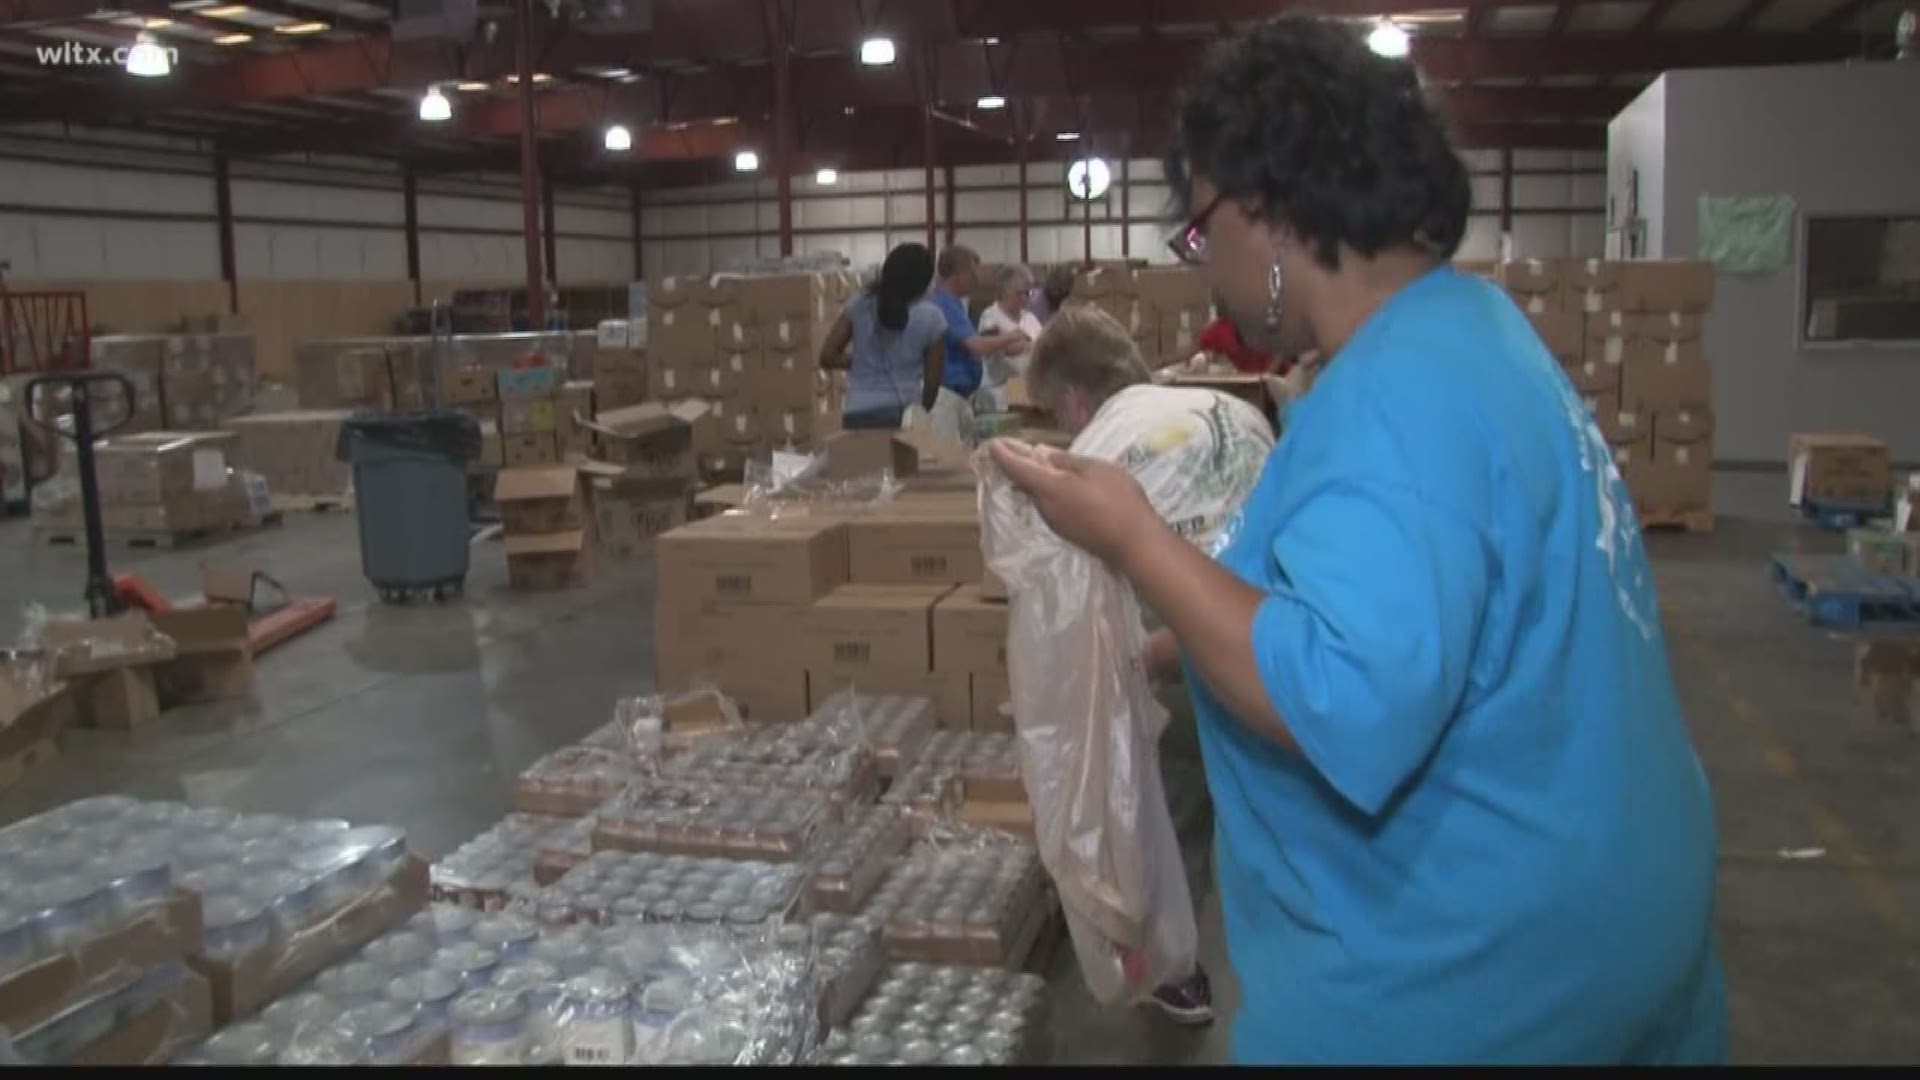 Volunteers at Harvest Hope Food Bank made over 500 bags of food for SC in preparation for Hurricane Florence. 